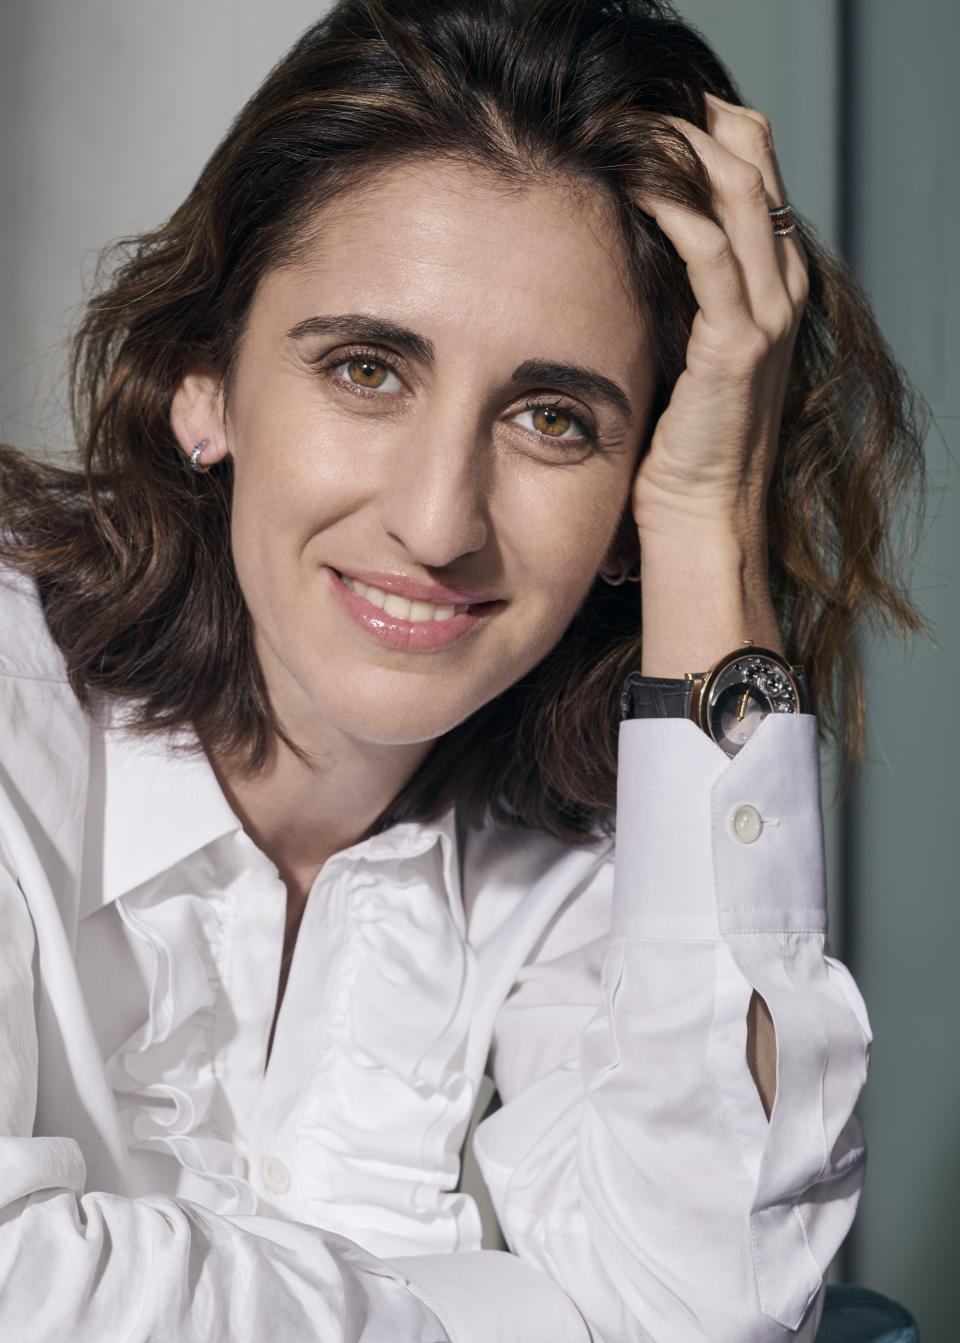 Piaget international director of communications and images Fatemeh Laleh